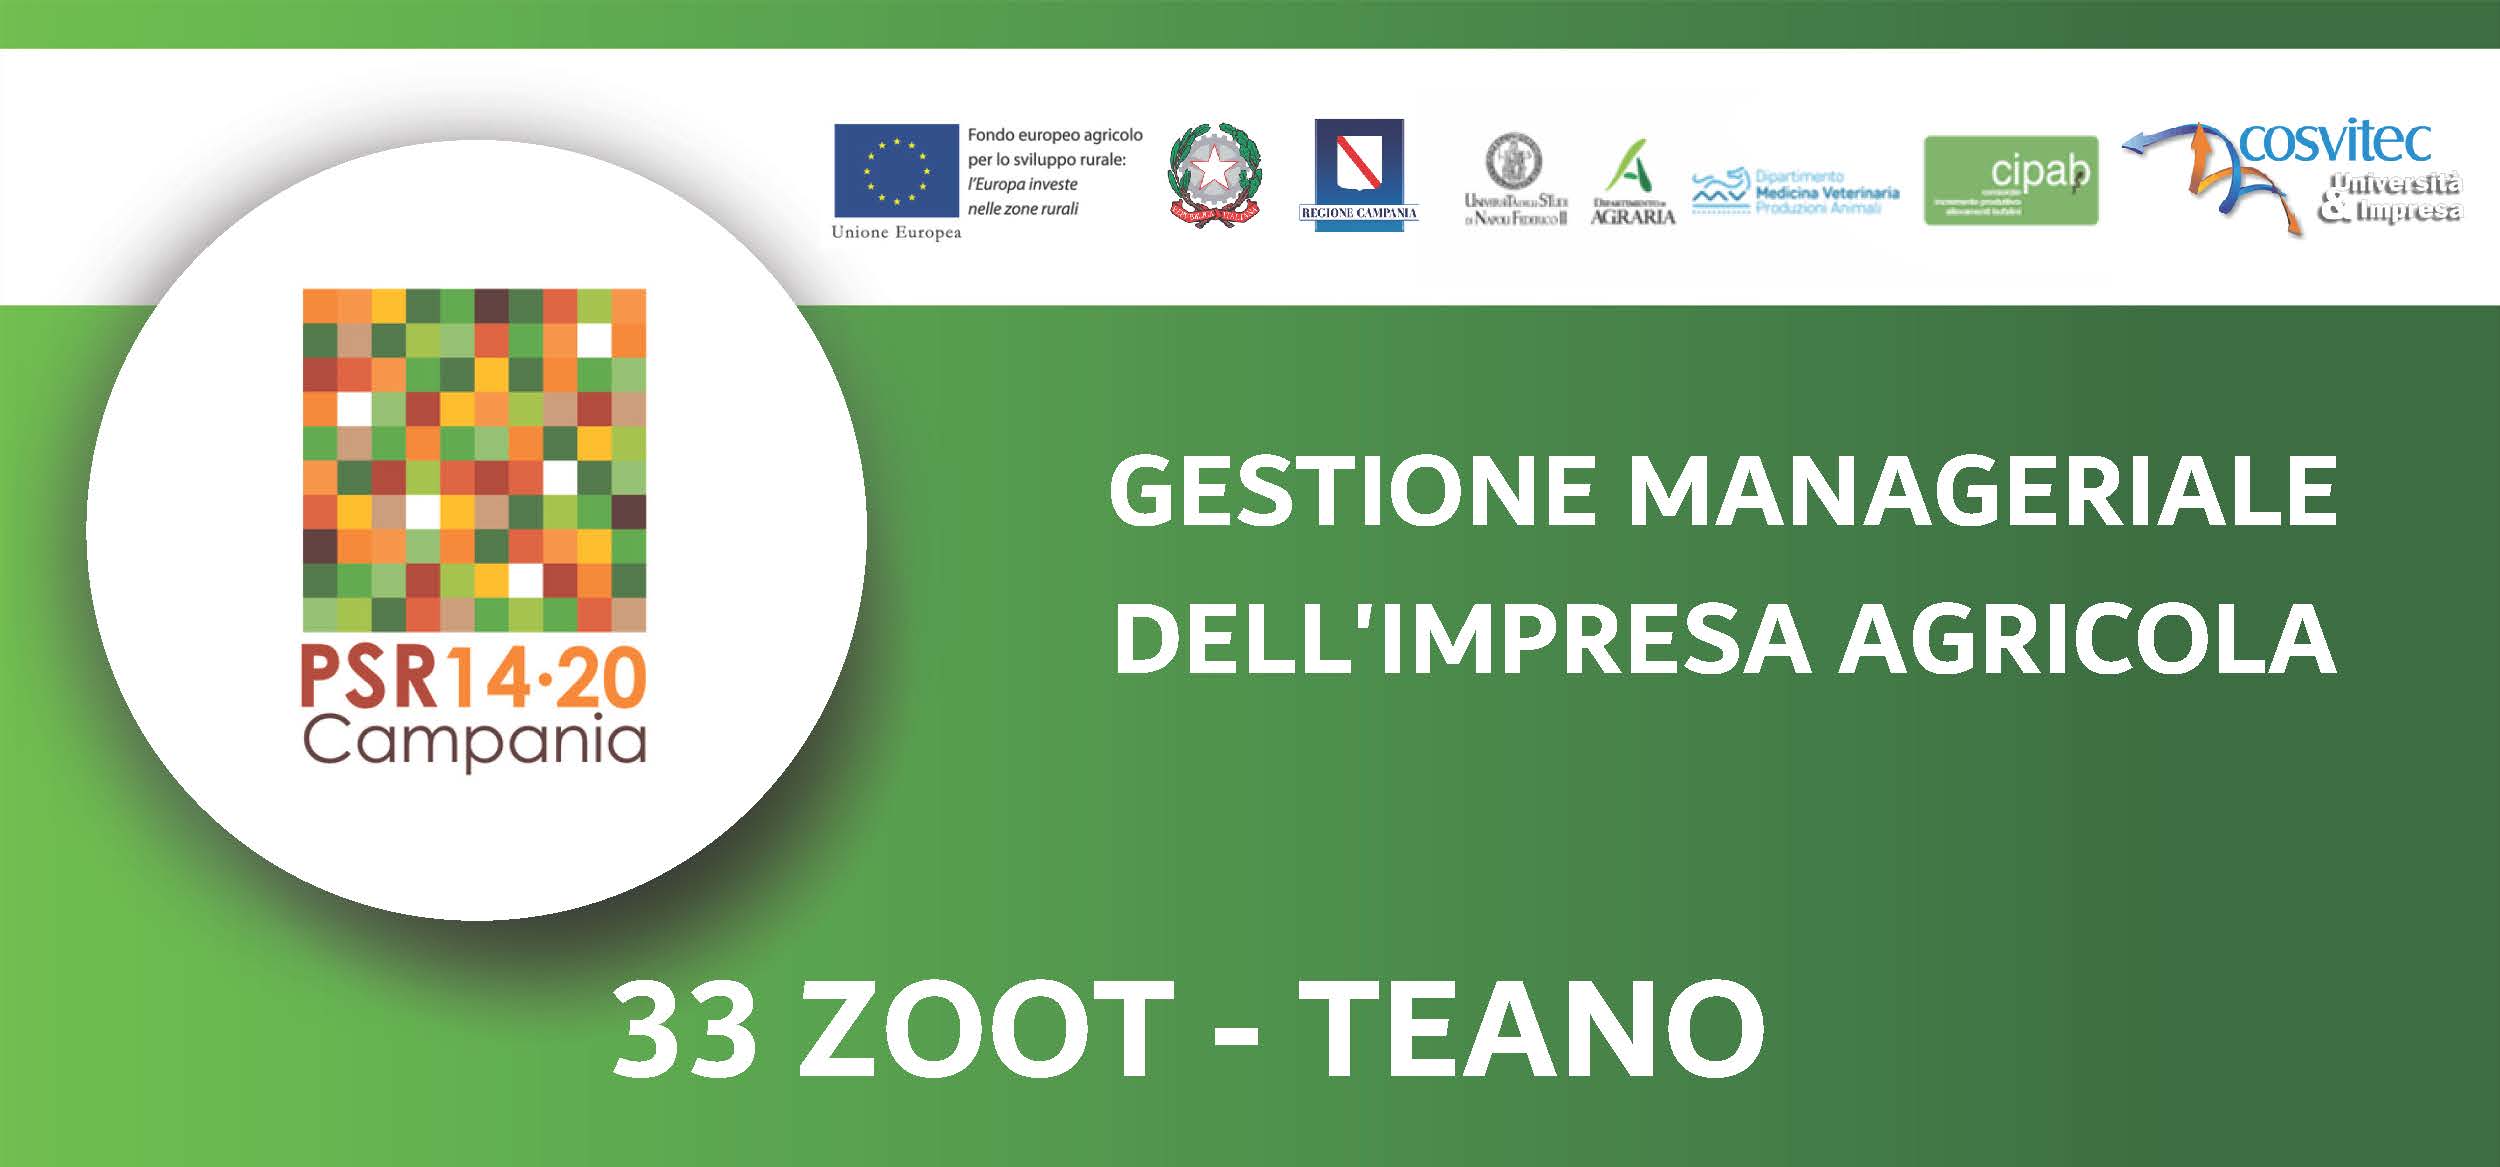 Gestione manageriale dell'impresa agricola - 33 ZOOT TEANO